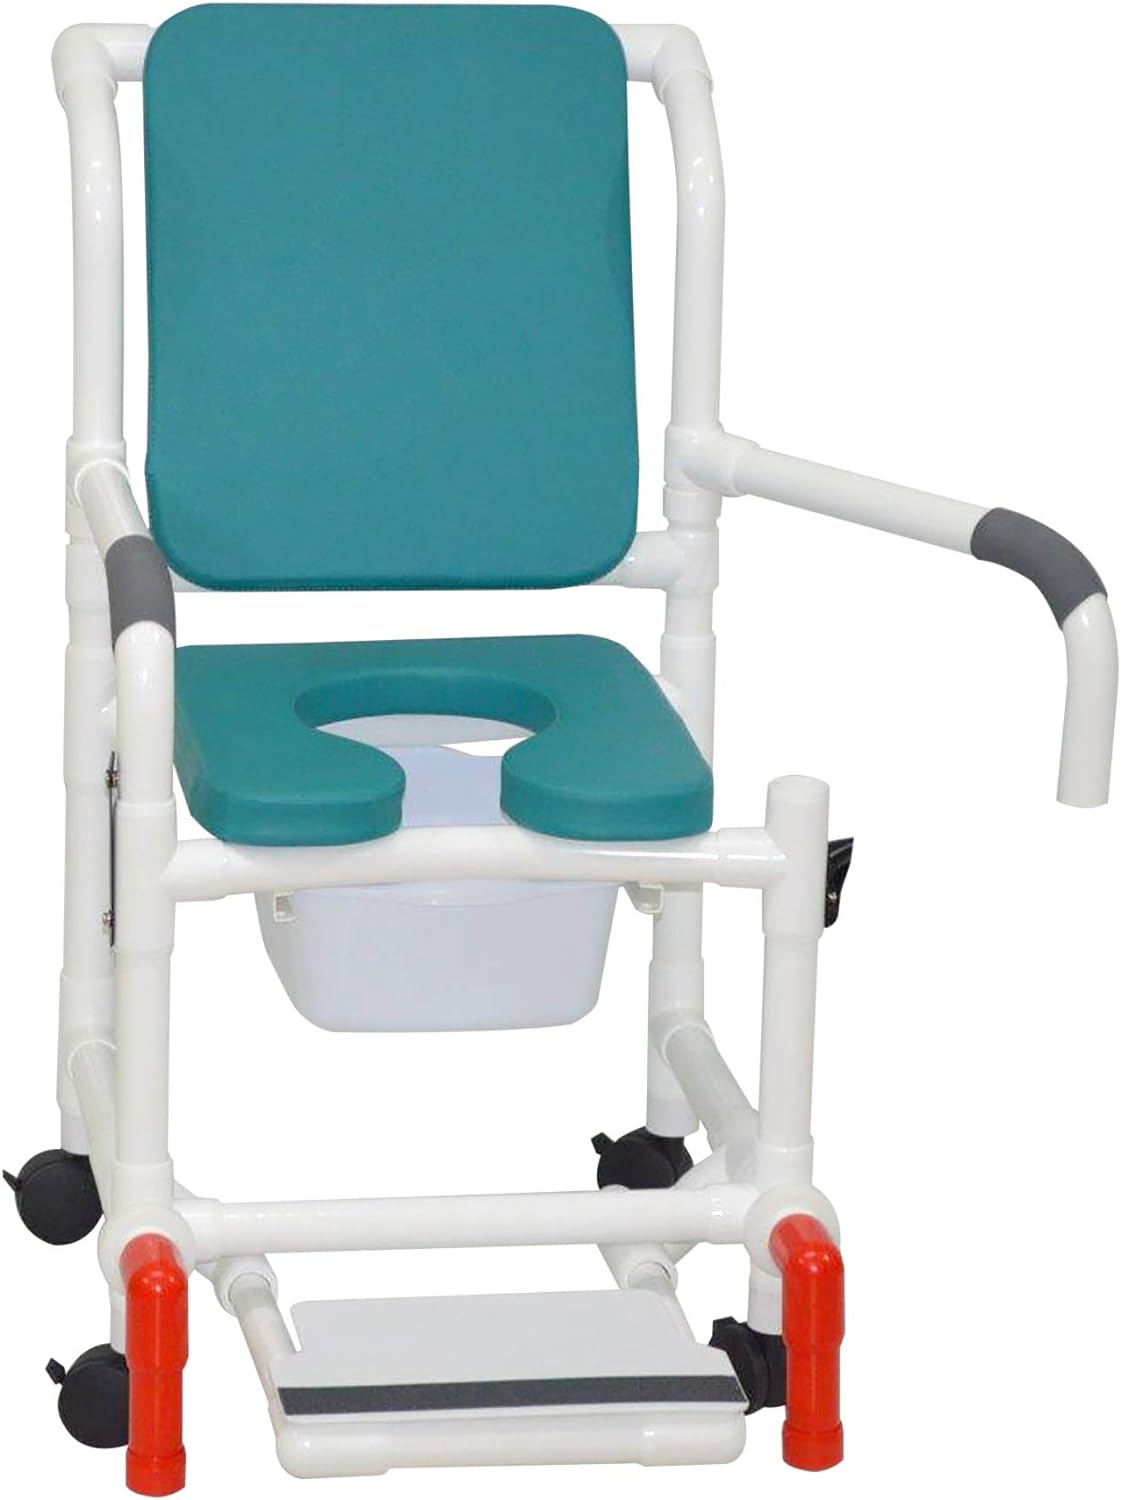 MJM International Corp. Shower chair 18Inch internal width 3Inch twin casters OCEAN BLUE deluxe elongated open front soft seat OCEAN BLUE cushion padded